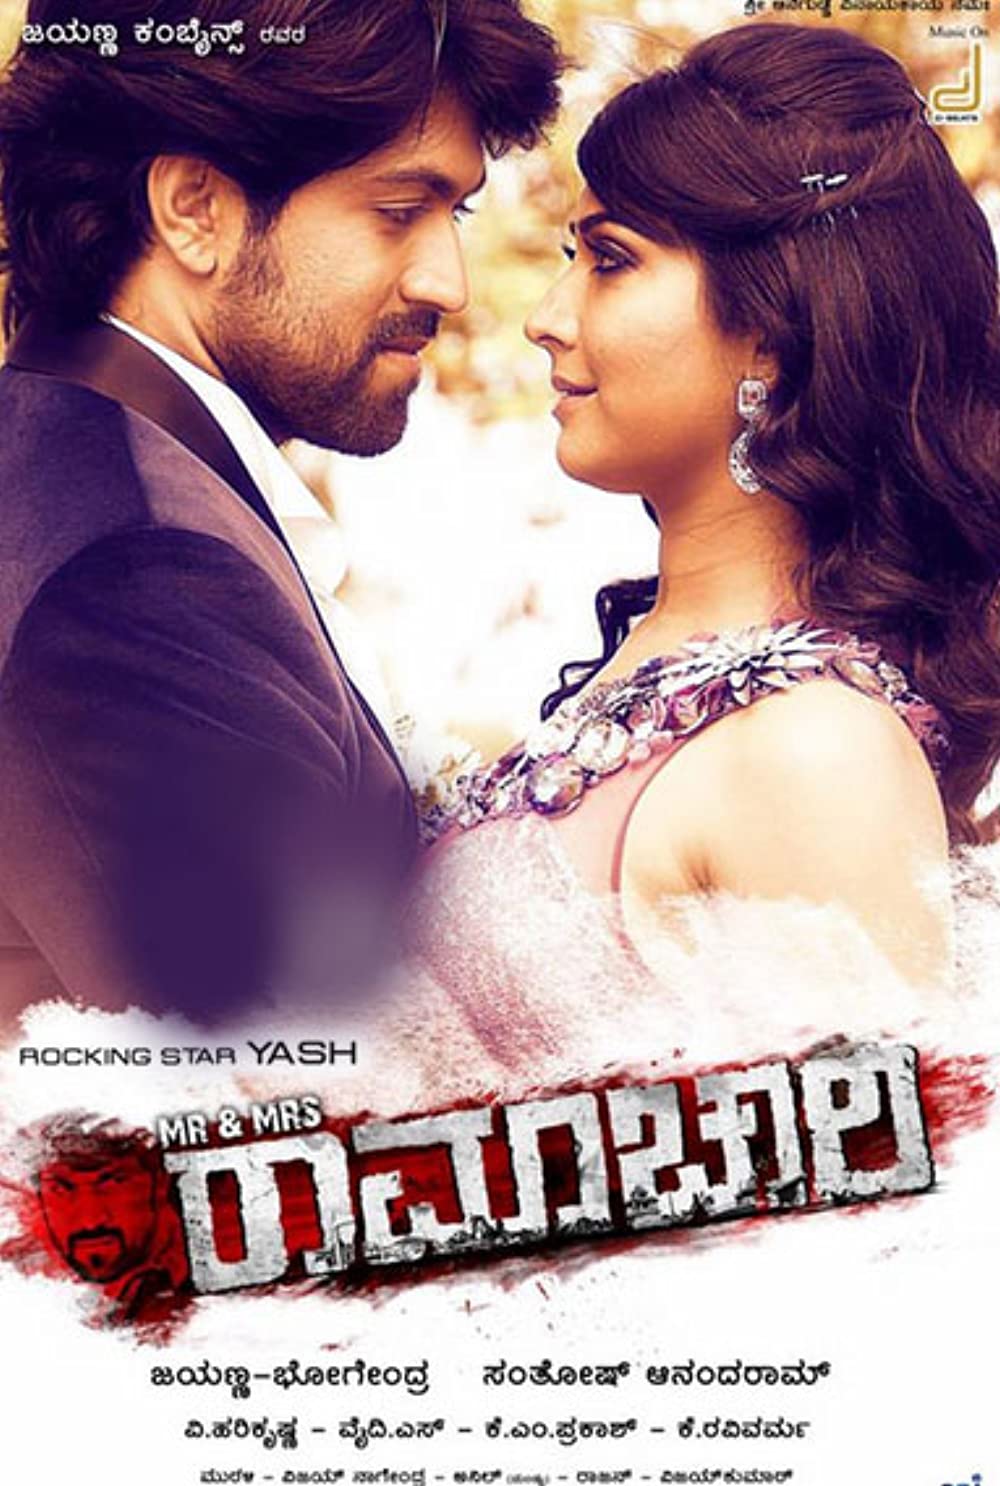 Mr And Mrs Ramachari Best Movies Of Yash The Best Of Indian Pop Culture And What S Trending On Web